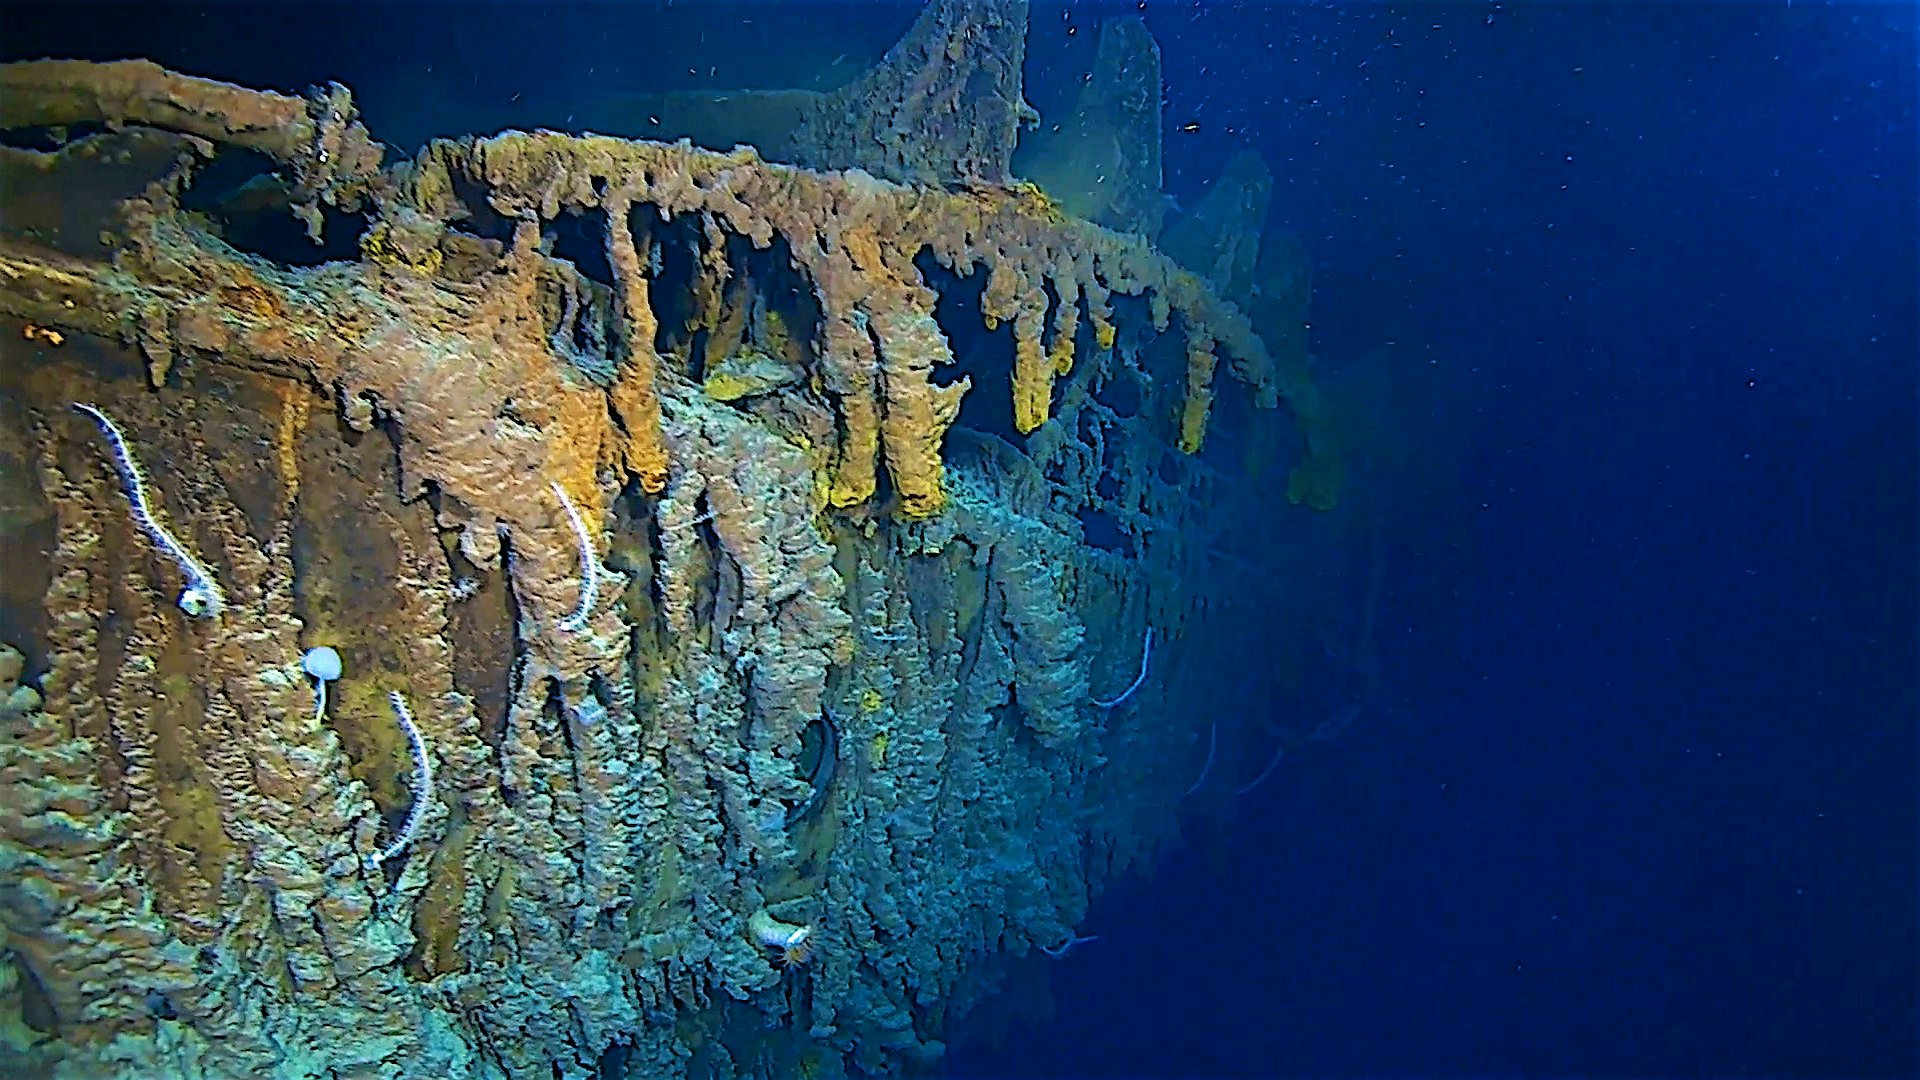 A view of the Titanic wreck taken 